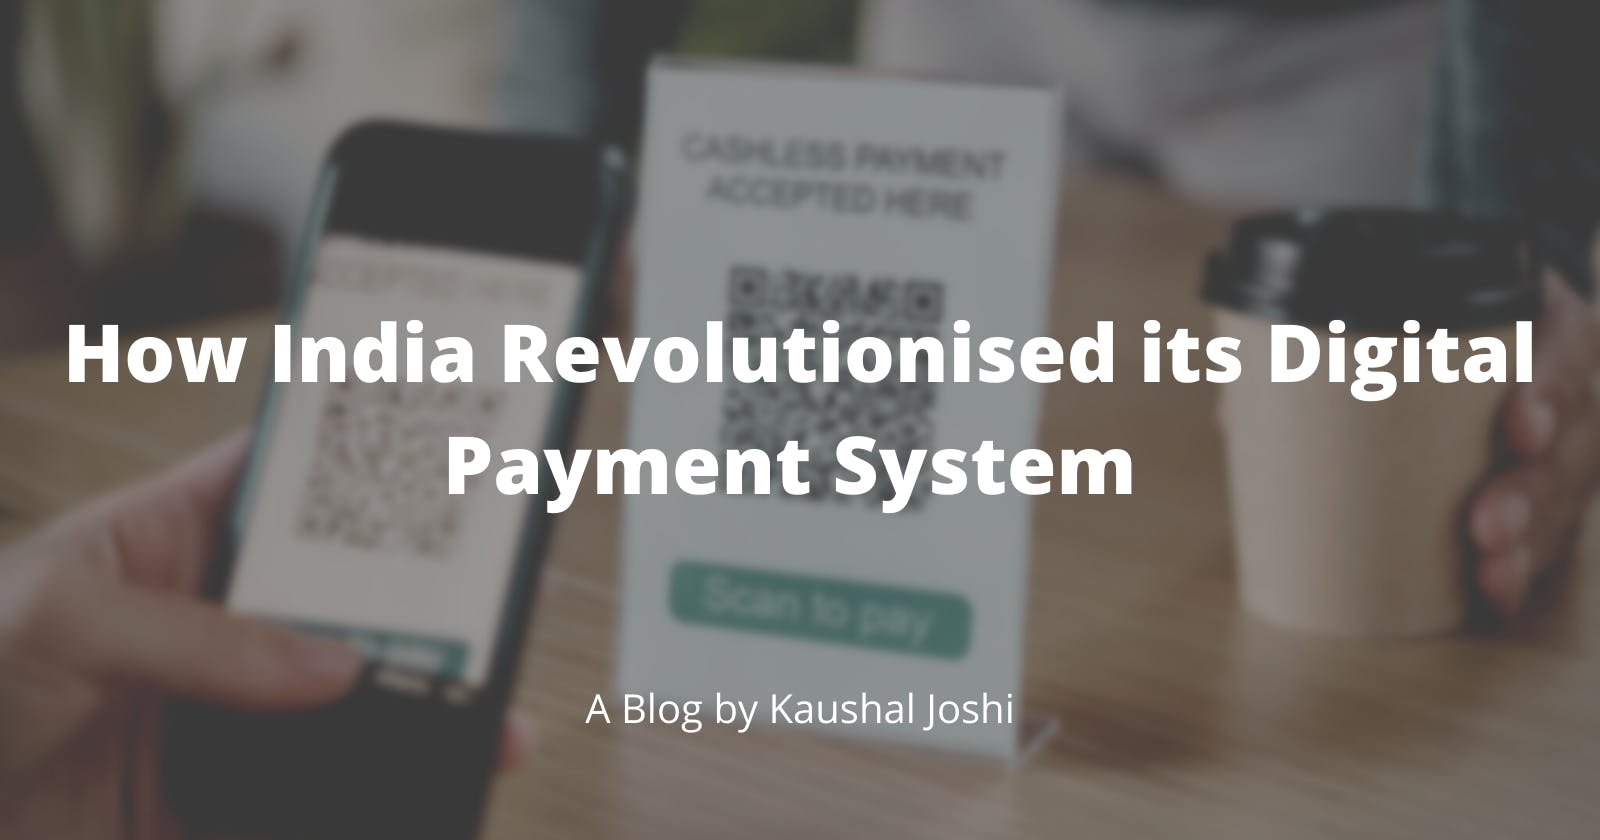 How India Revolutionised its Digital Payment System